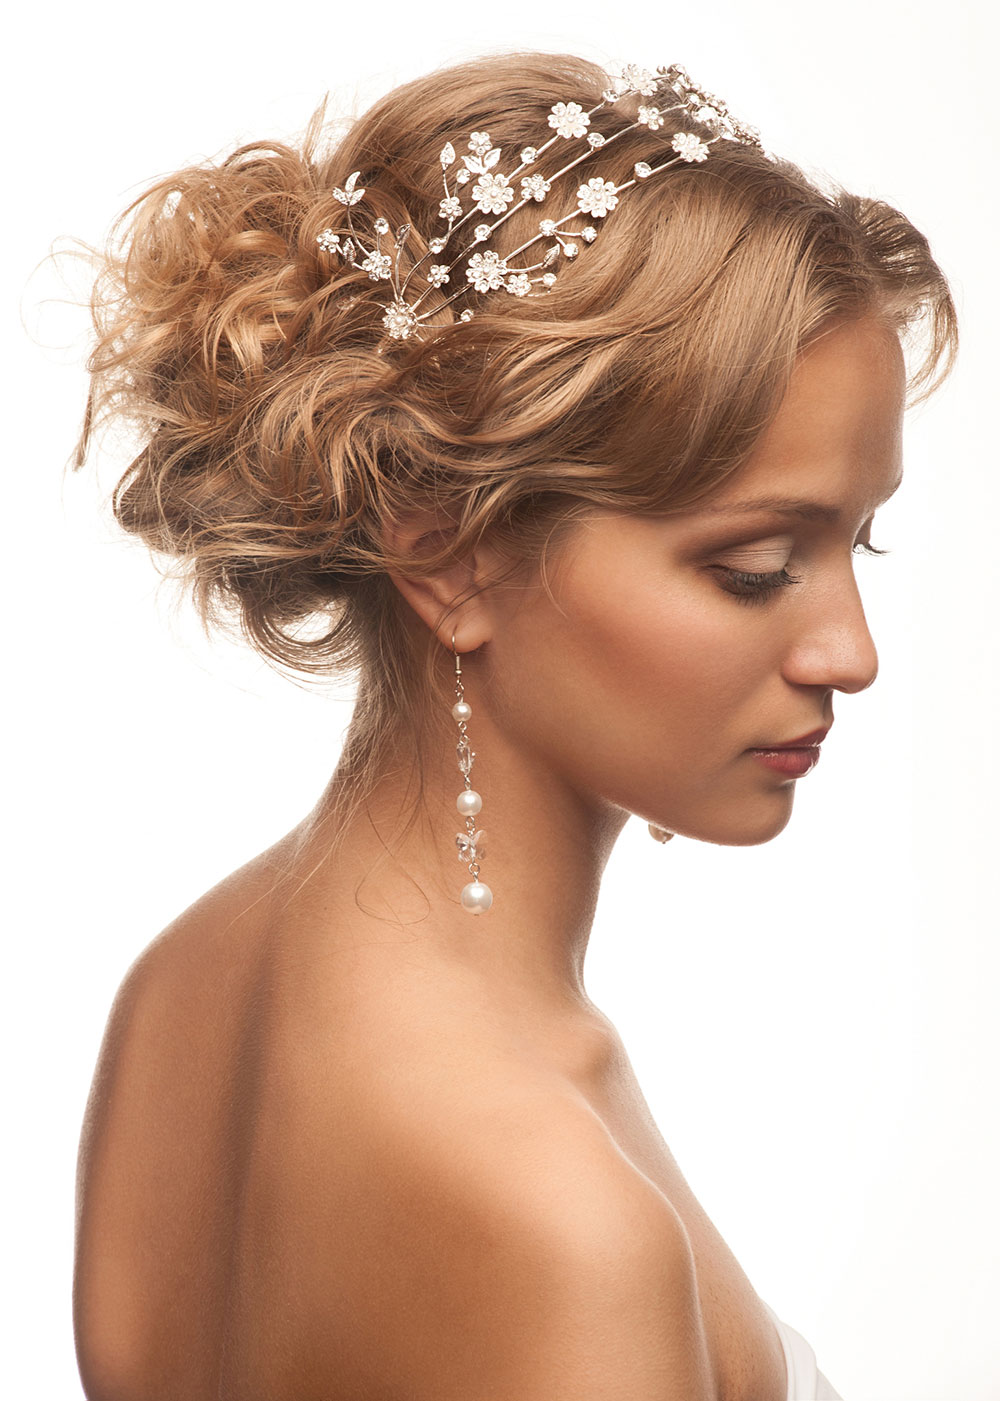 Messy side bun with accessories Wedding short hairstyle